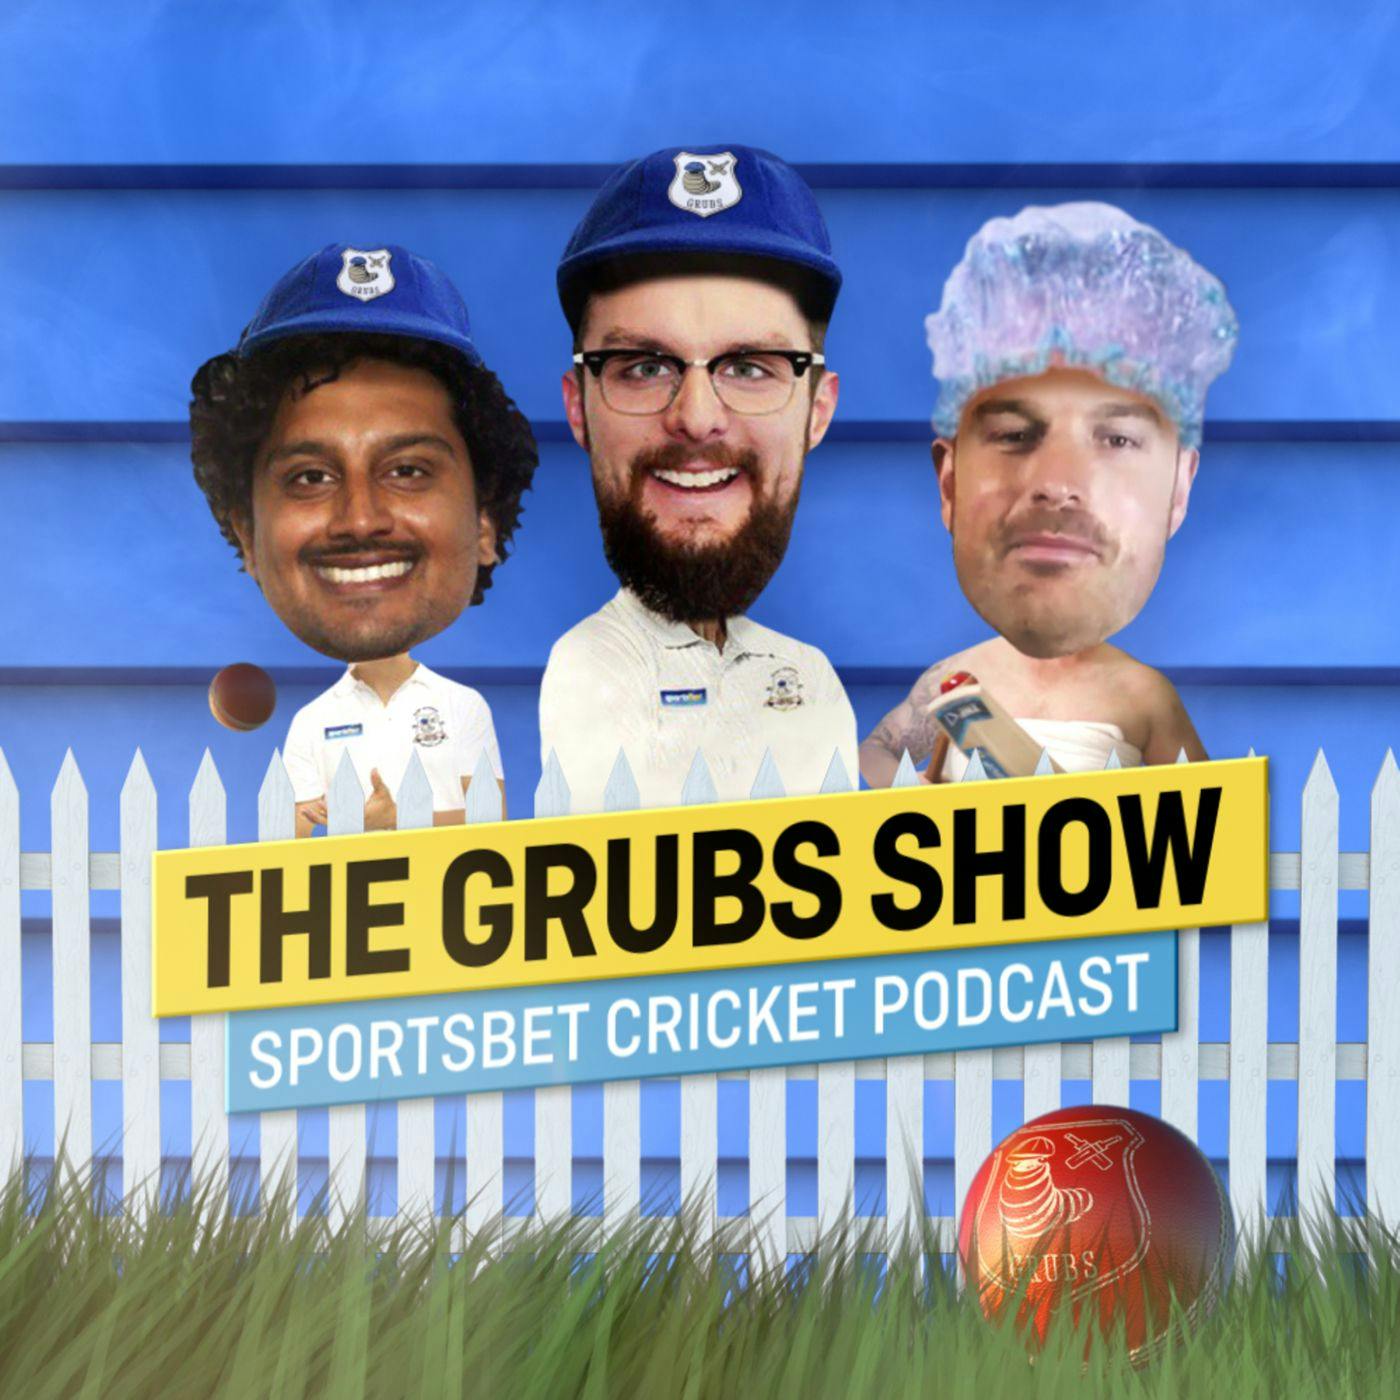 Three Slips No Cover - The Grubs review The Test (Part 2)